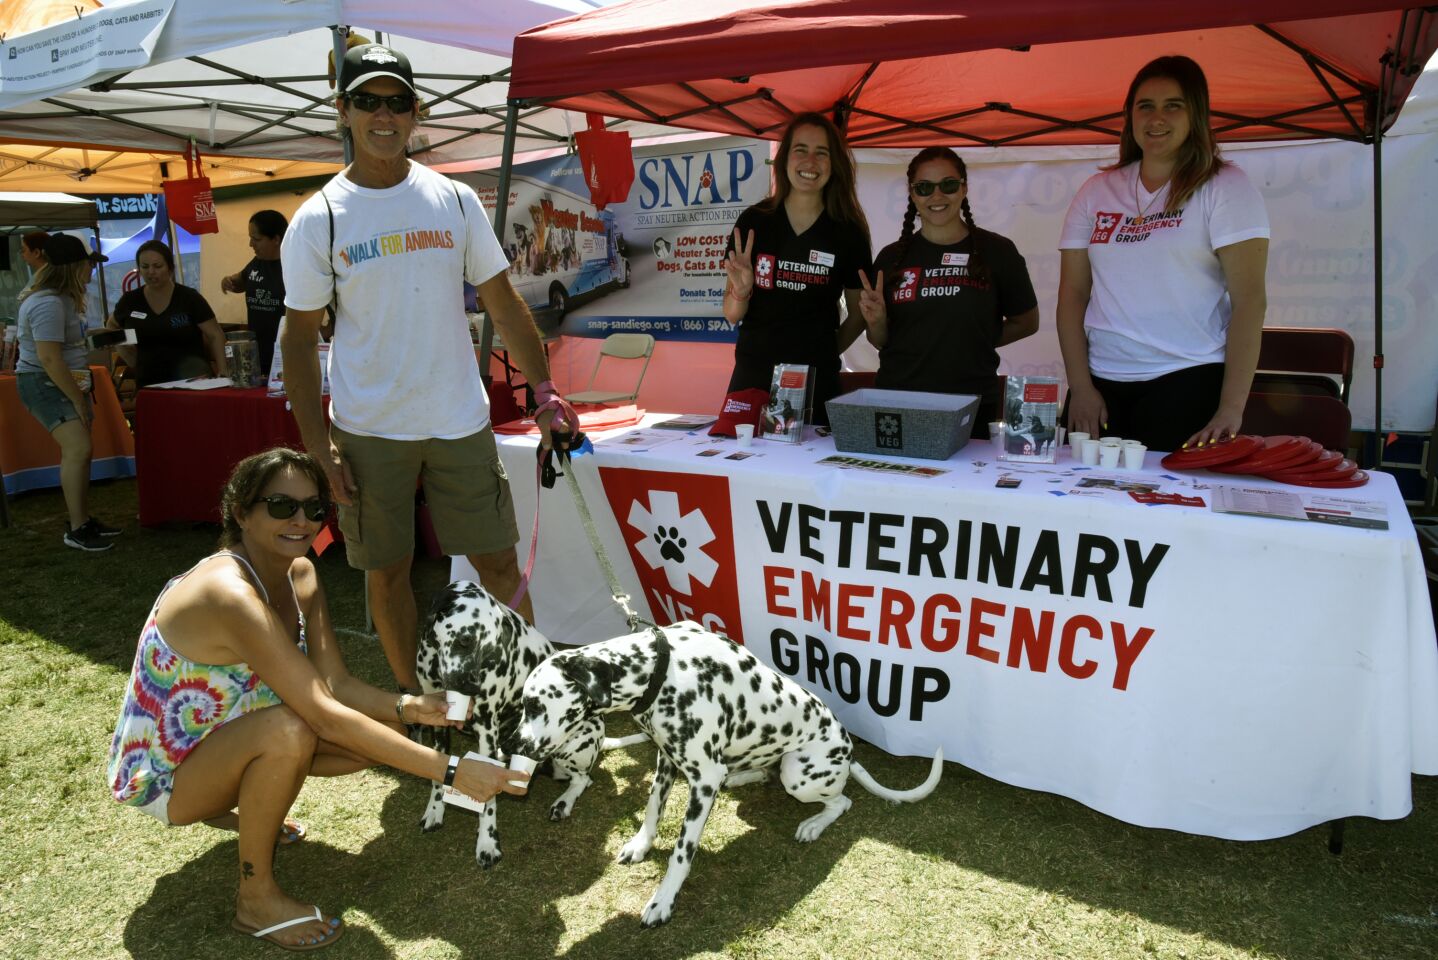 Joanne and Scott Owen with Bailey and Bentley, Dr. Erin Mortimer, Hospital Manager Becky Kobari, Manager Shelby Frye of sponsor Veterinary Emergency Group